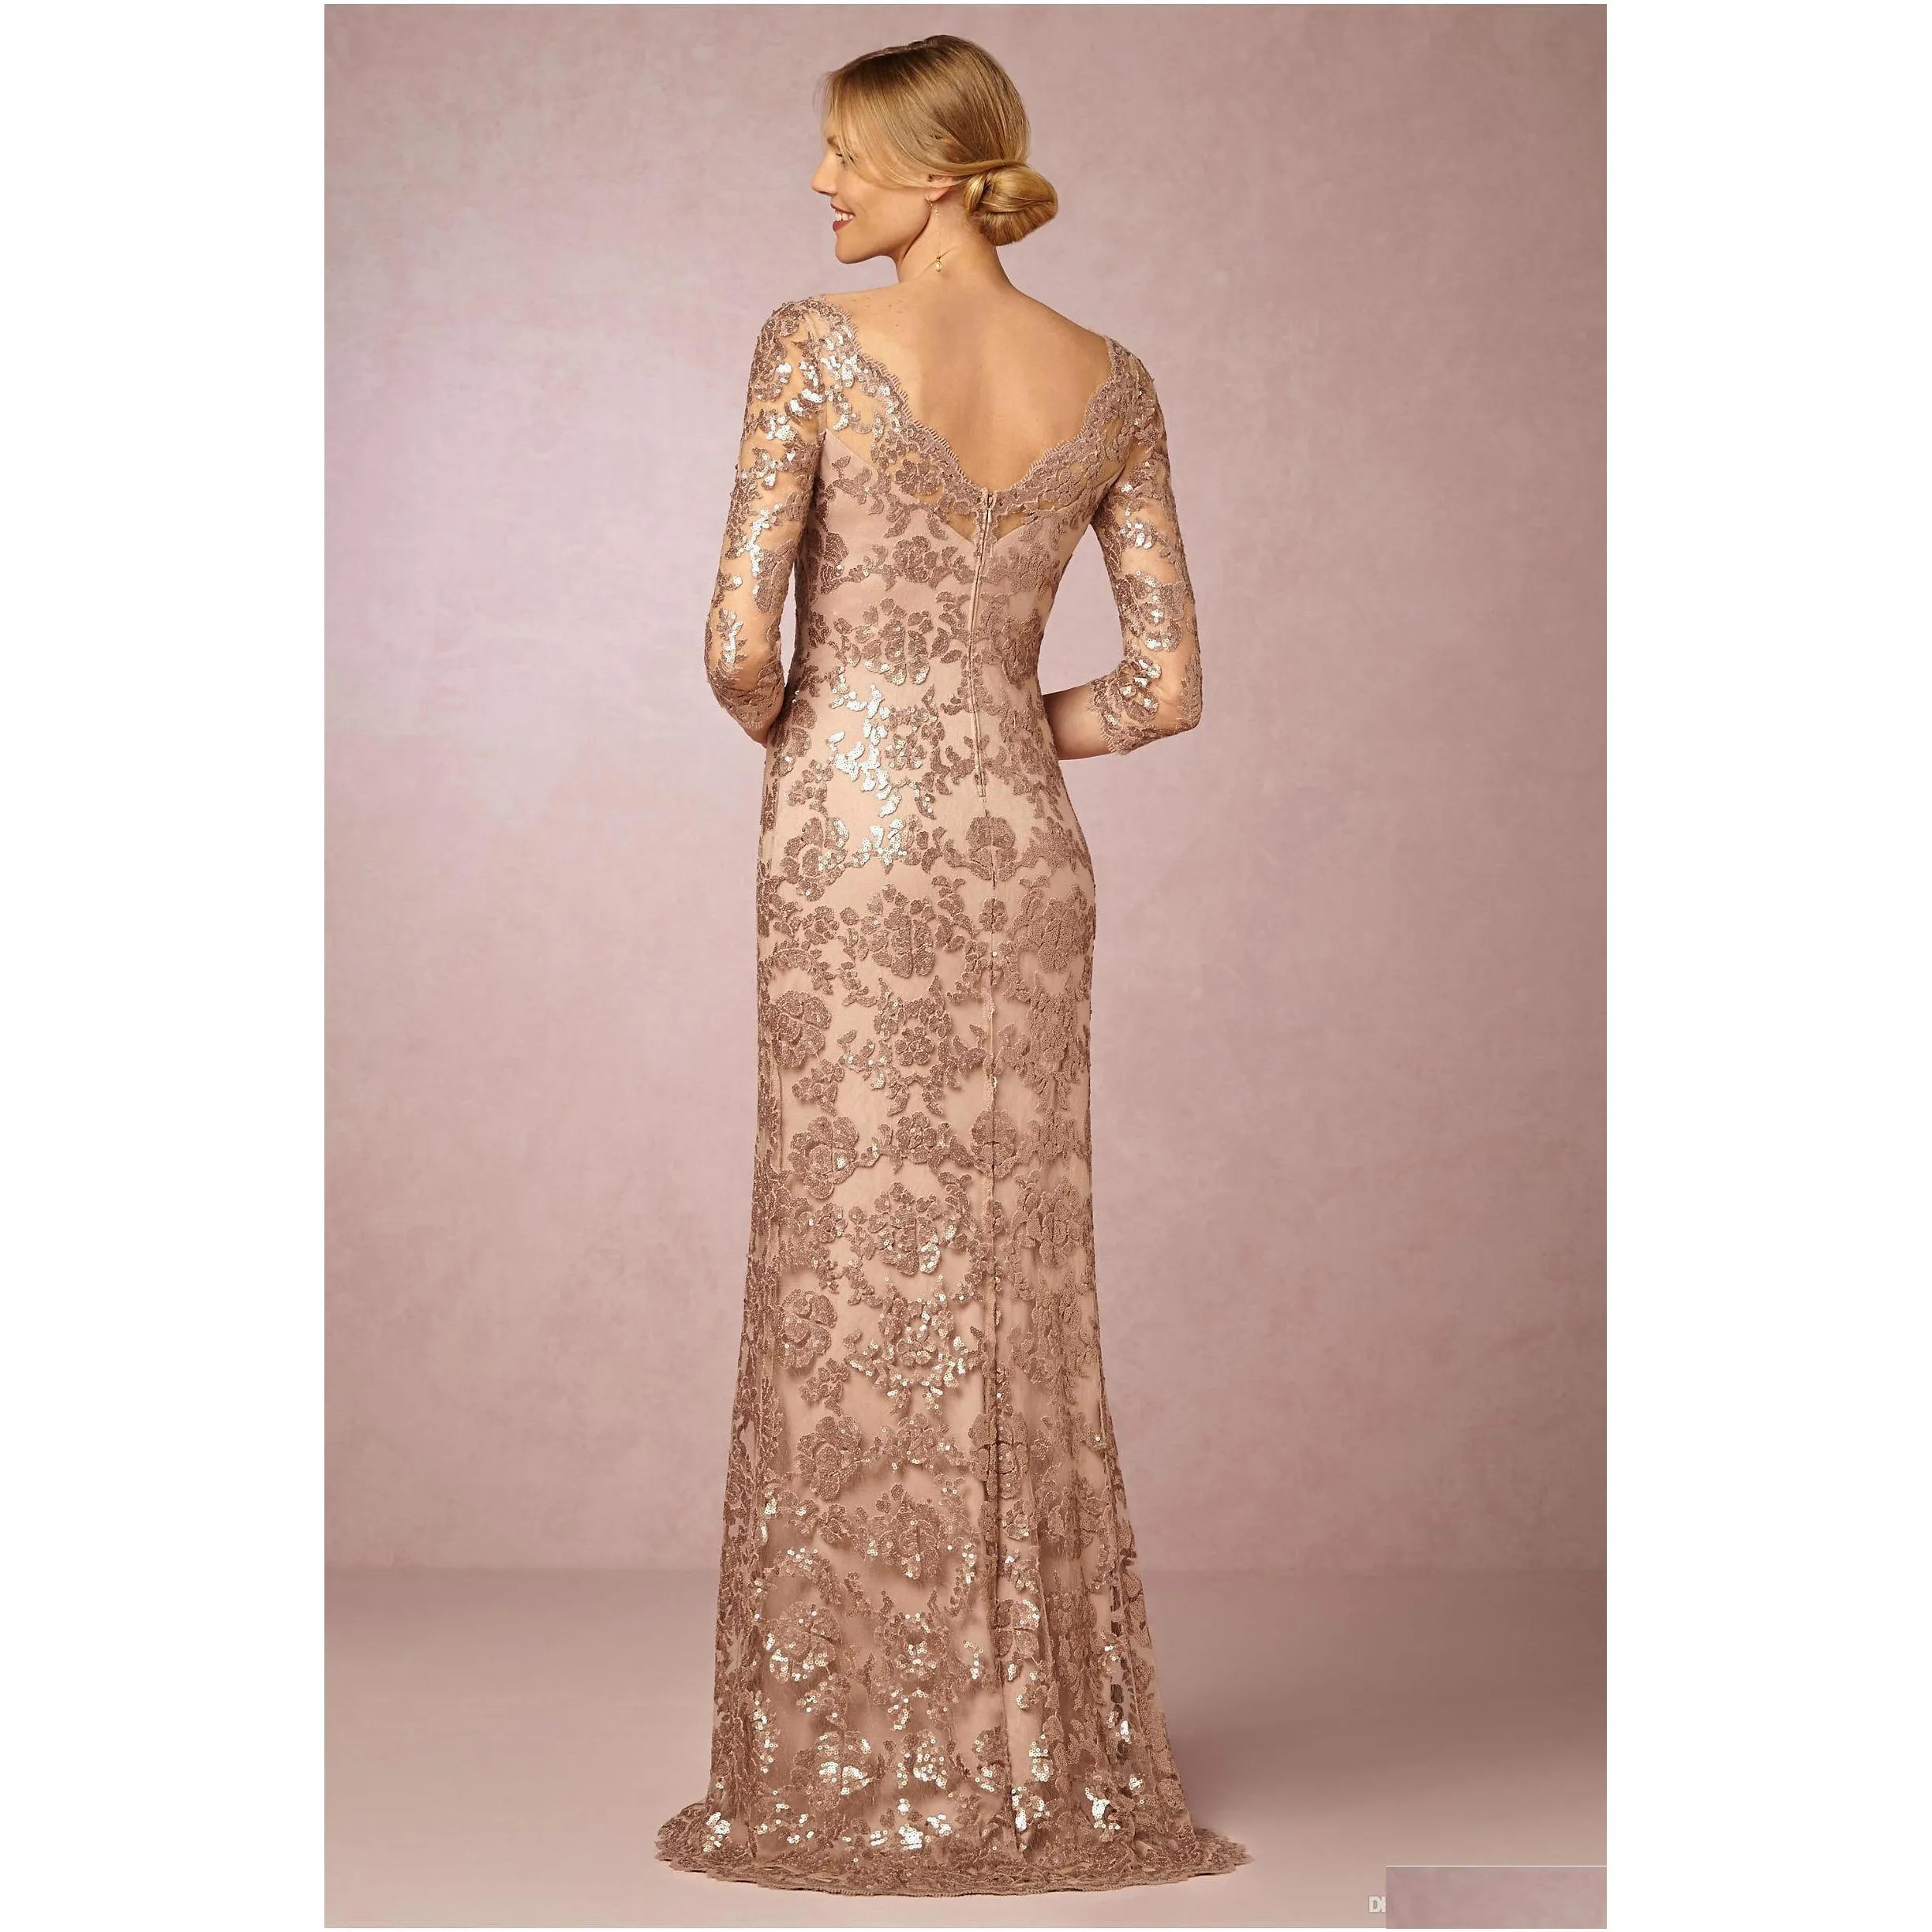  rose gold mermaid evening dresses with half sleeves sequin long prom dresses elegant formal evening gowns robe de soiree ba0528